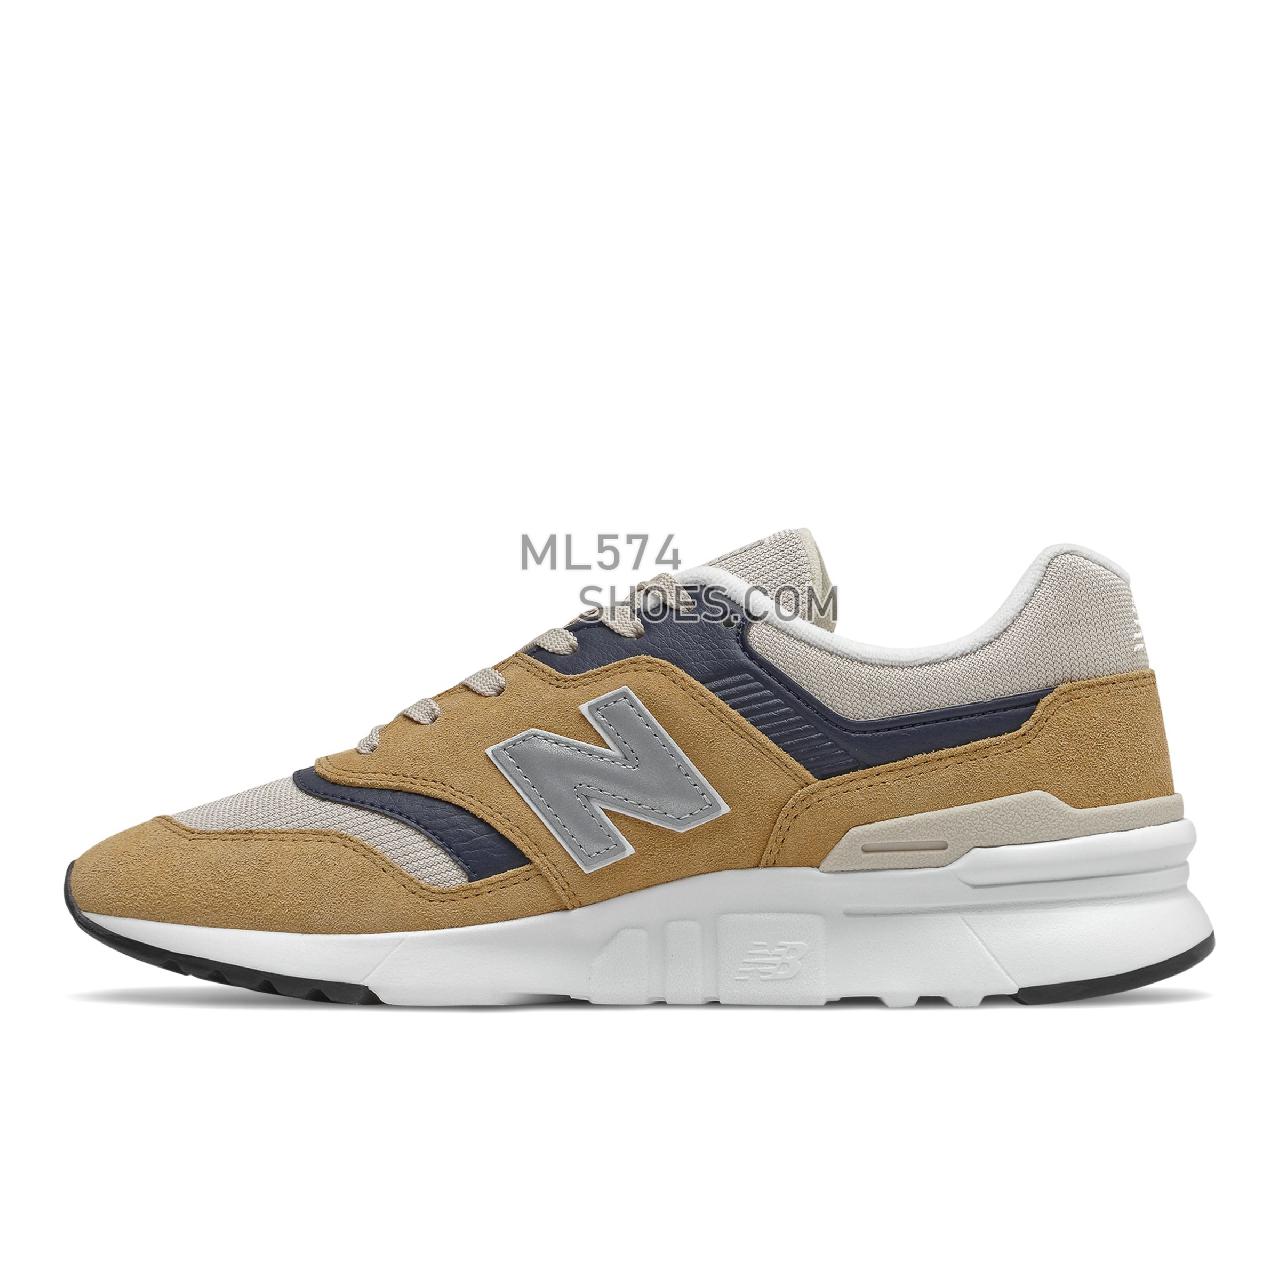 New Balance 997H - Men's Sport Style Sneakers - Brown with White - CM997HTA